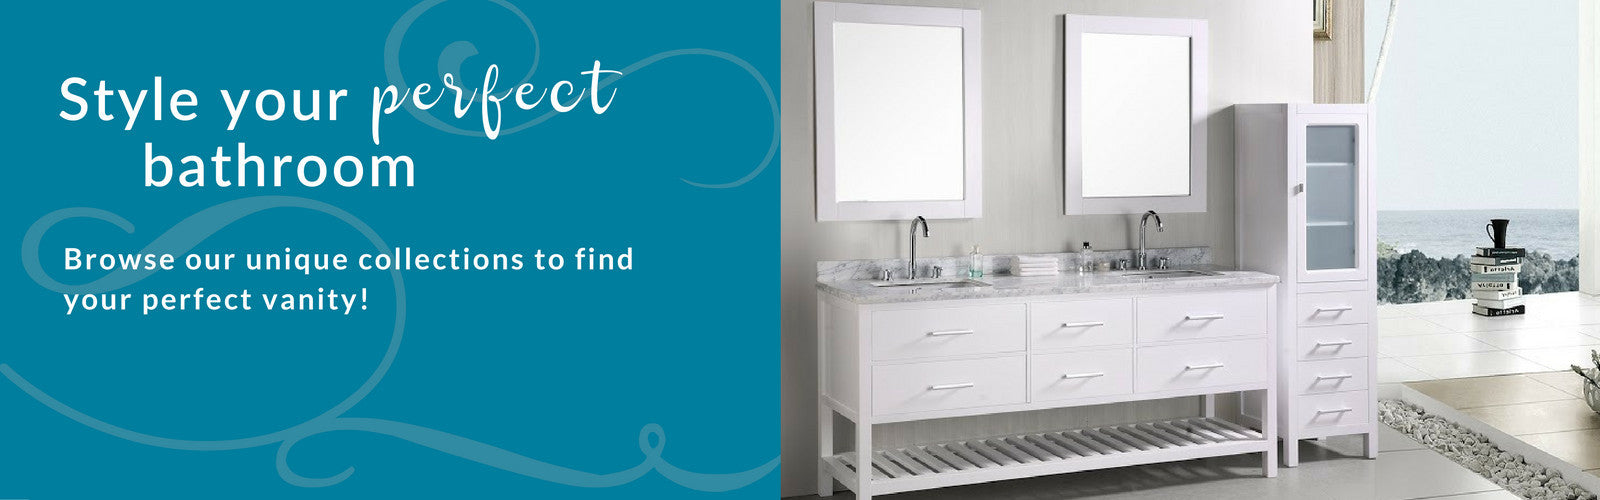 Bathroom vanity sets for every style, need and budget